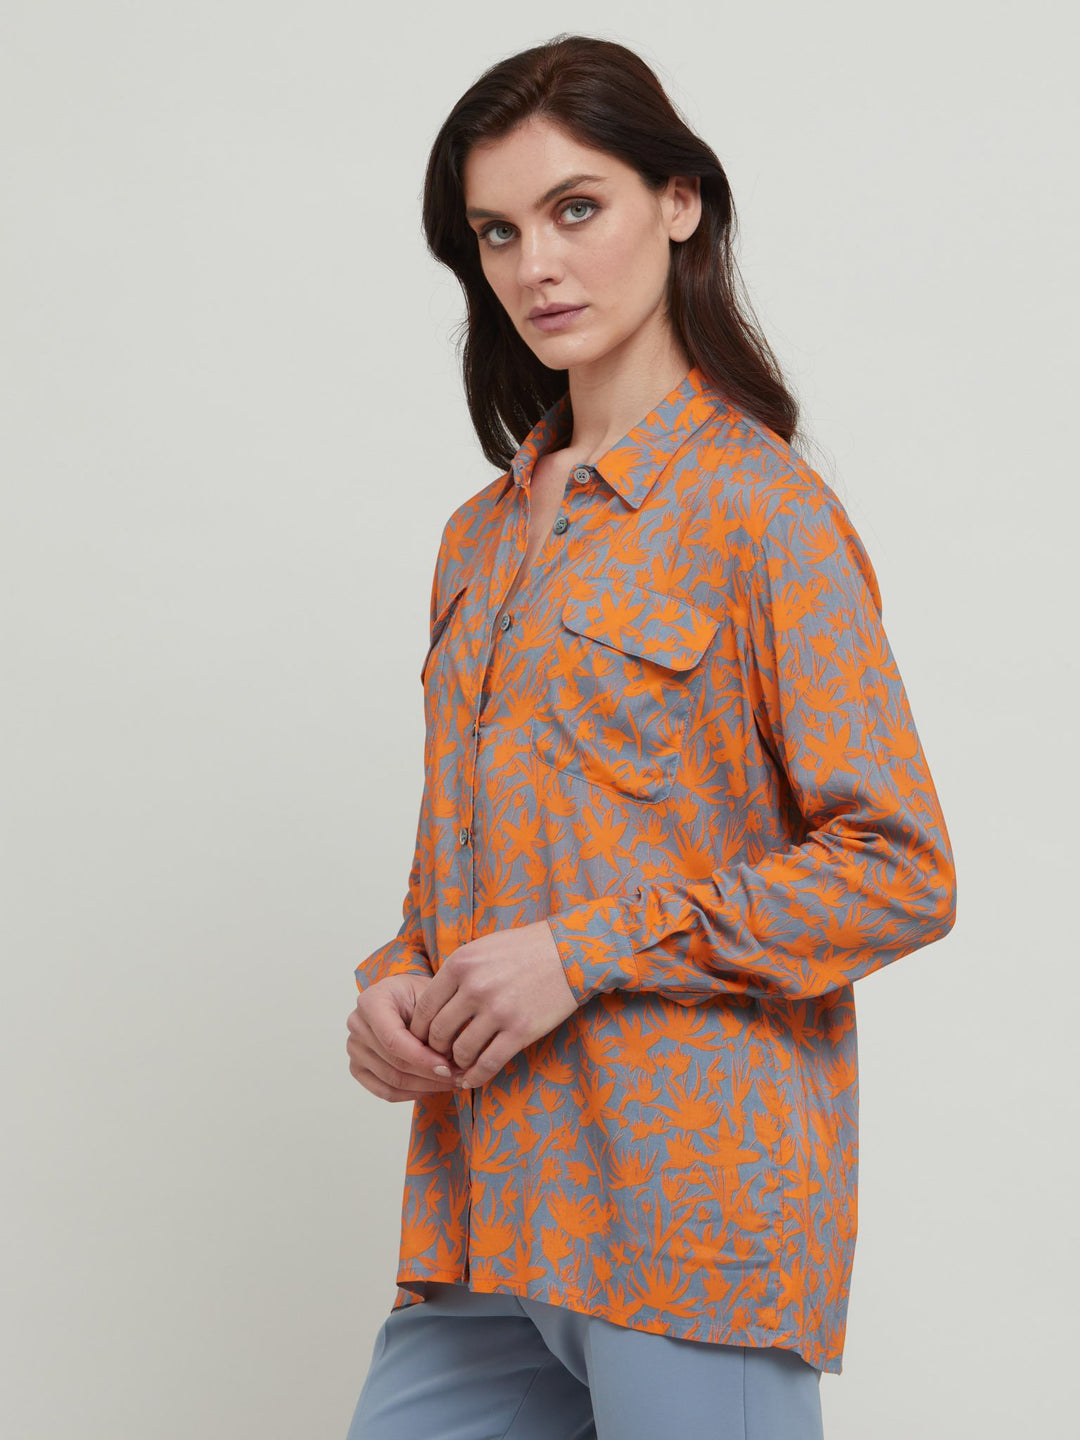 A classic shirt crafted in breathable viscose . This lux staple with flap pockets, back yoke & center back box pleat. An easy-fit shirt to elevate your everyday. Crafted in an adventurous and sophisticated rust & smoky blue print. Designed in Ireland by Helen McAlinden. Made in Europe. Free shipping to the EU & UK.